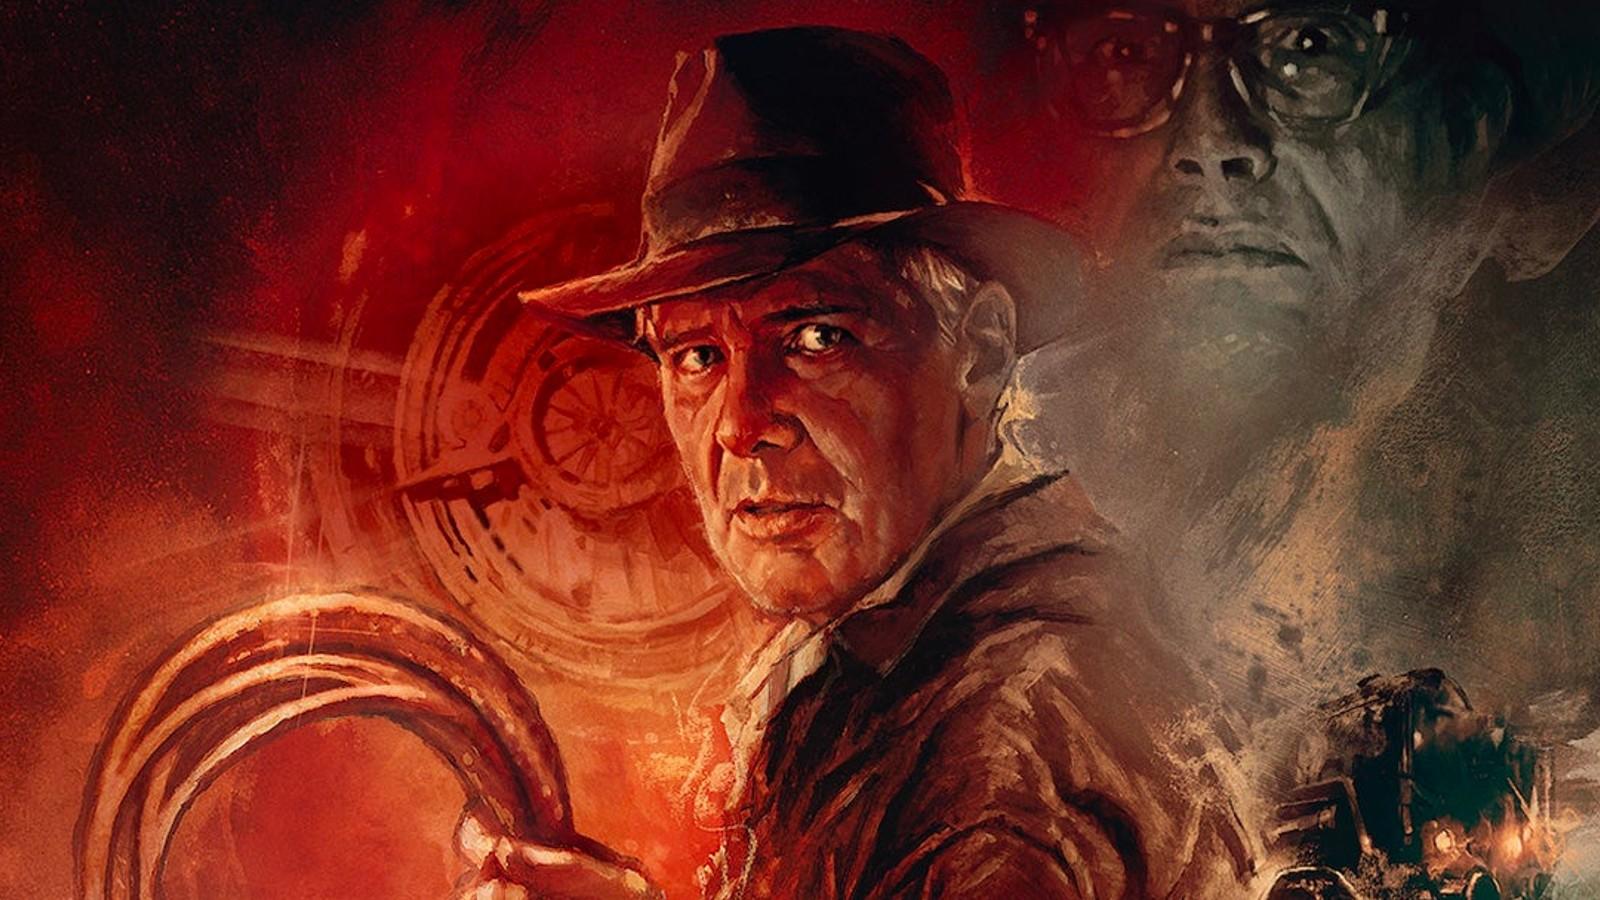 Here's How To Watch Indiana Jones And The Dial Of Destiny Free Online: Is Indiana  Jones 5 (2023) Streaming On Disney Plus Or Netflix